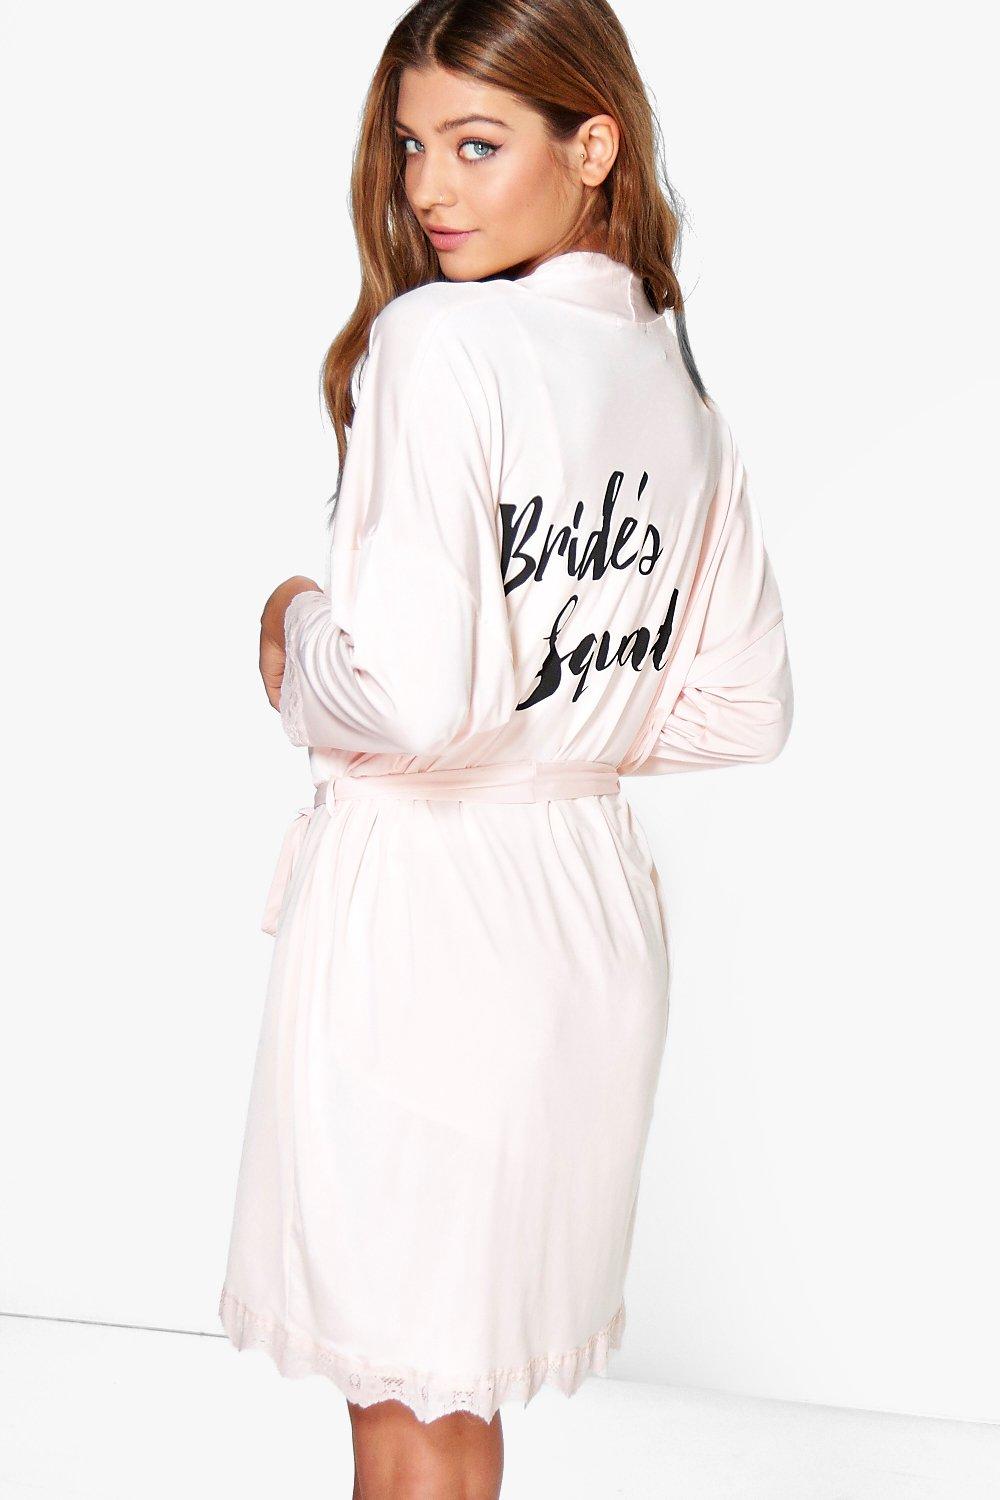 bride squad dressing gown, OFF 73%,Buy!